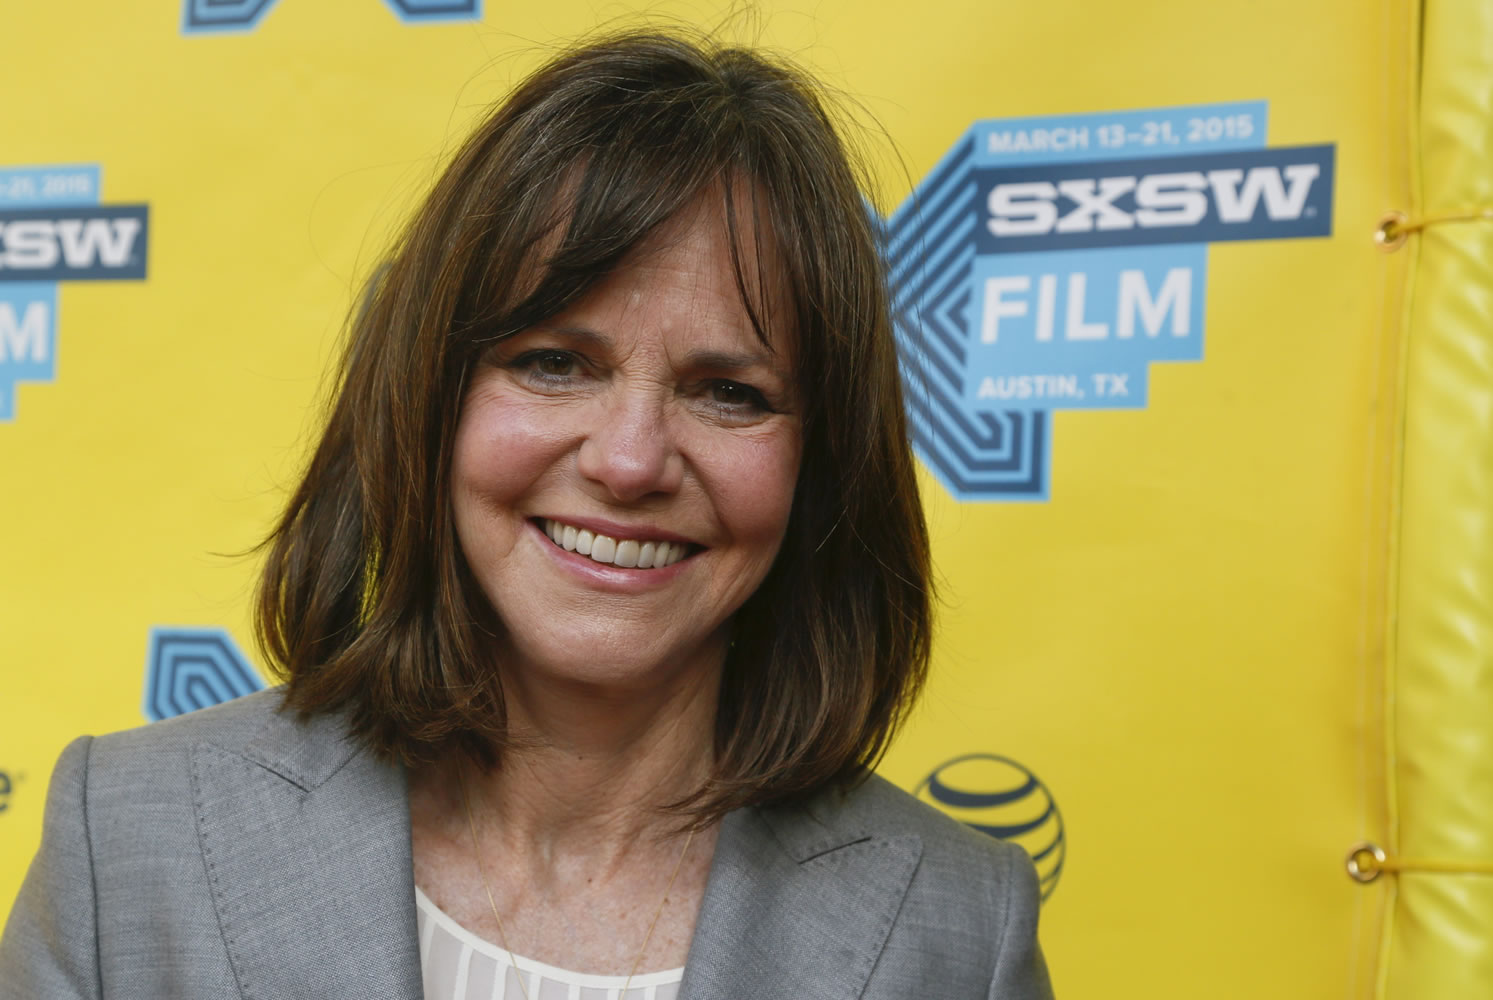 FILE - In this March 14, 2015 file photo, Sally Field attends the &quot;Hello, My Name is Doris&quot; red carpet during the South by Southwest Film Festival in Austin, Texas. Field is one of several artists who will receive the National Medal of Arts from President Barack Obama at a White House ceremony. The president and first lady Michelle Obama will present the award Sept. 10, 2015 to Field and 11 others.